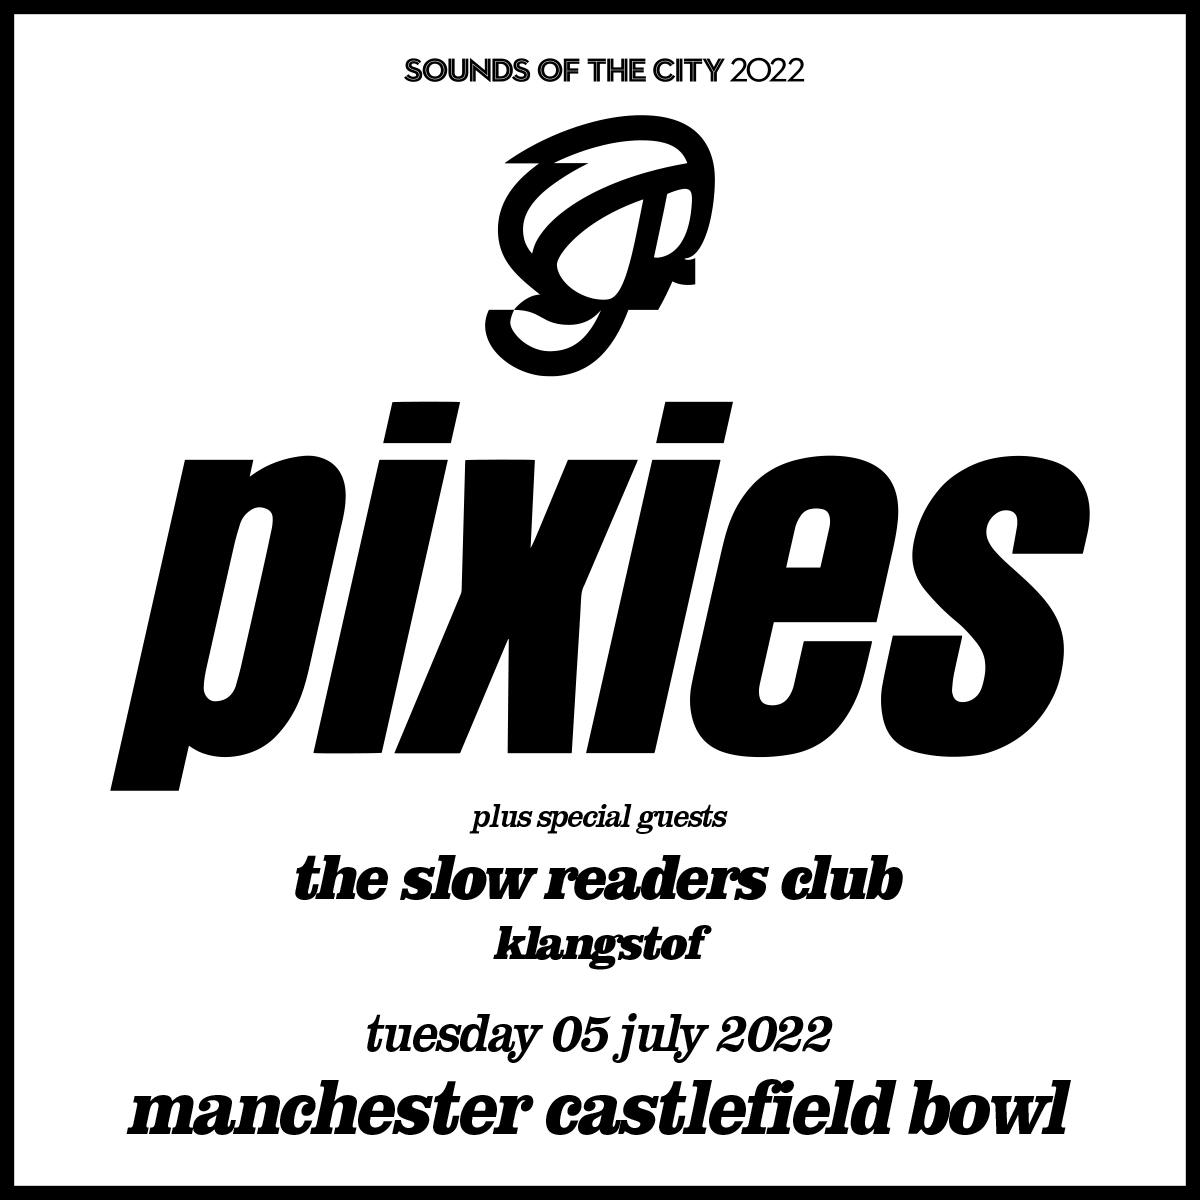 SOUNDS OF THE CITY PRESENTS PIXIES AT MANCHESTER CASTLEFIELD BOWL